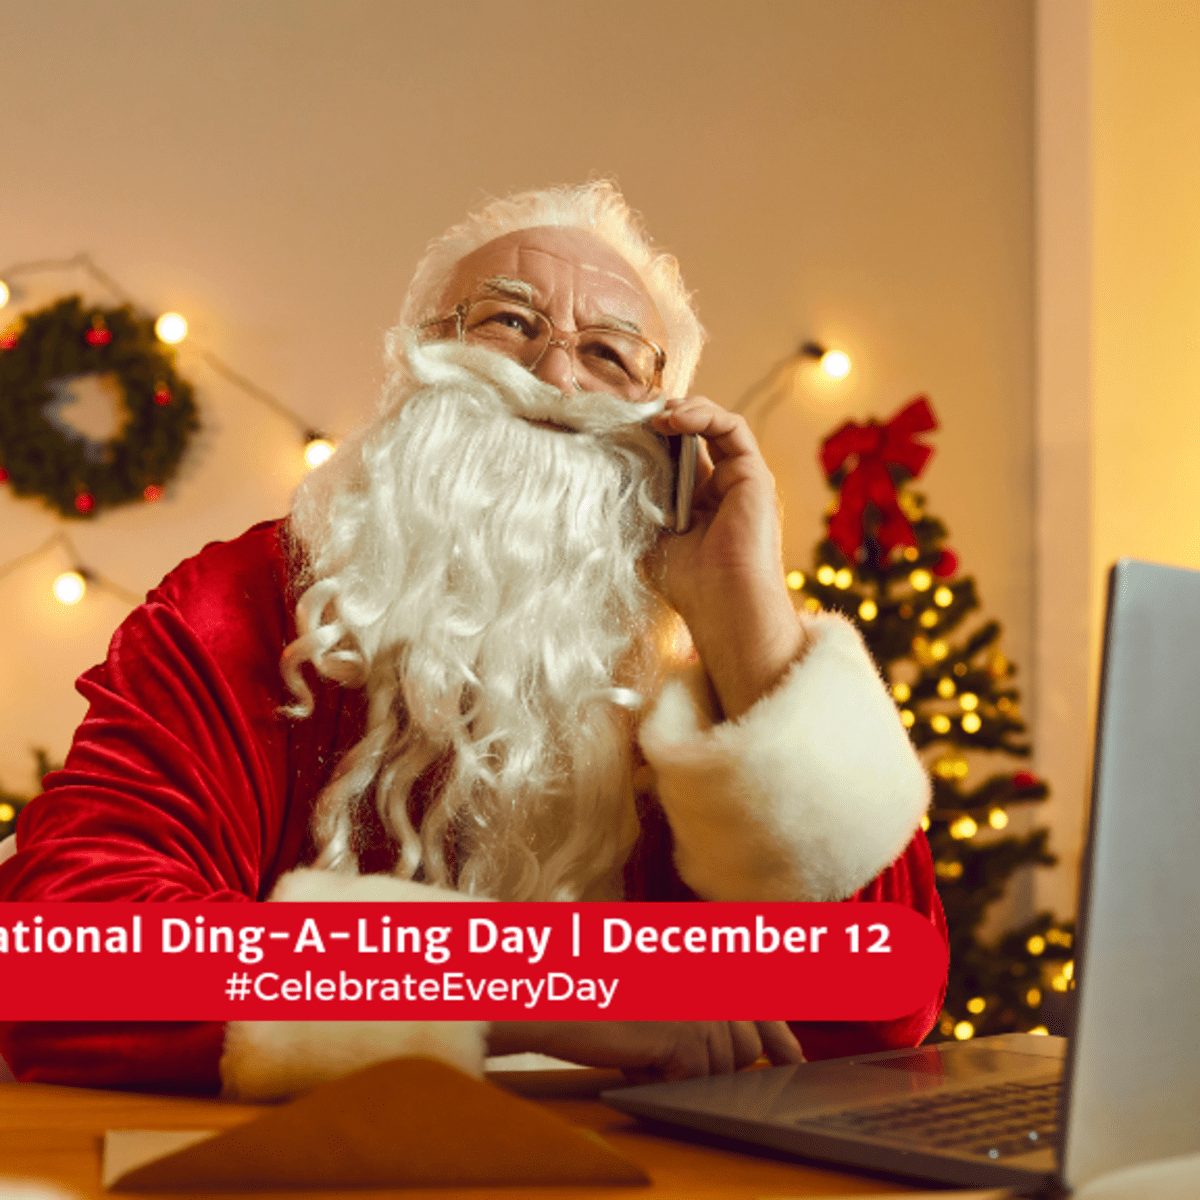 NATIONAL DING-A-LING DAY - December 12 - National Day Calendar